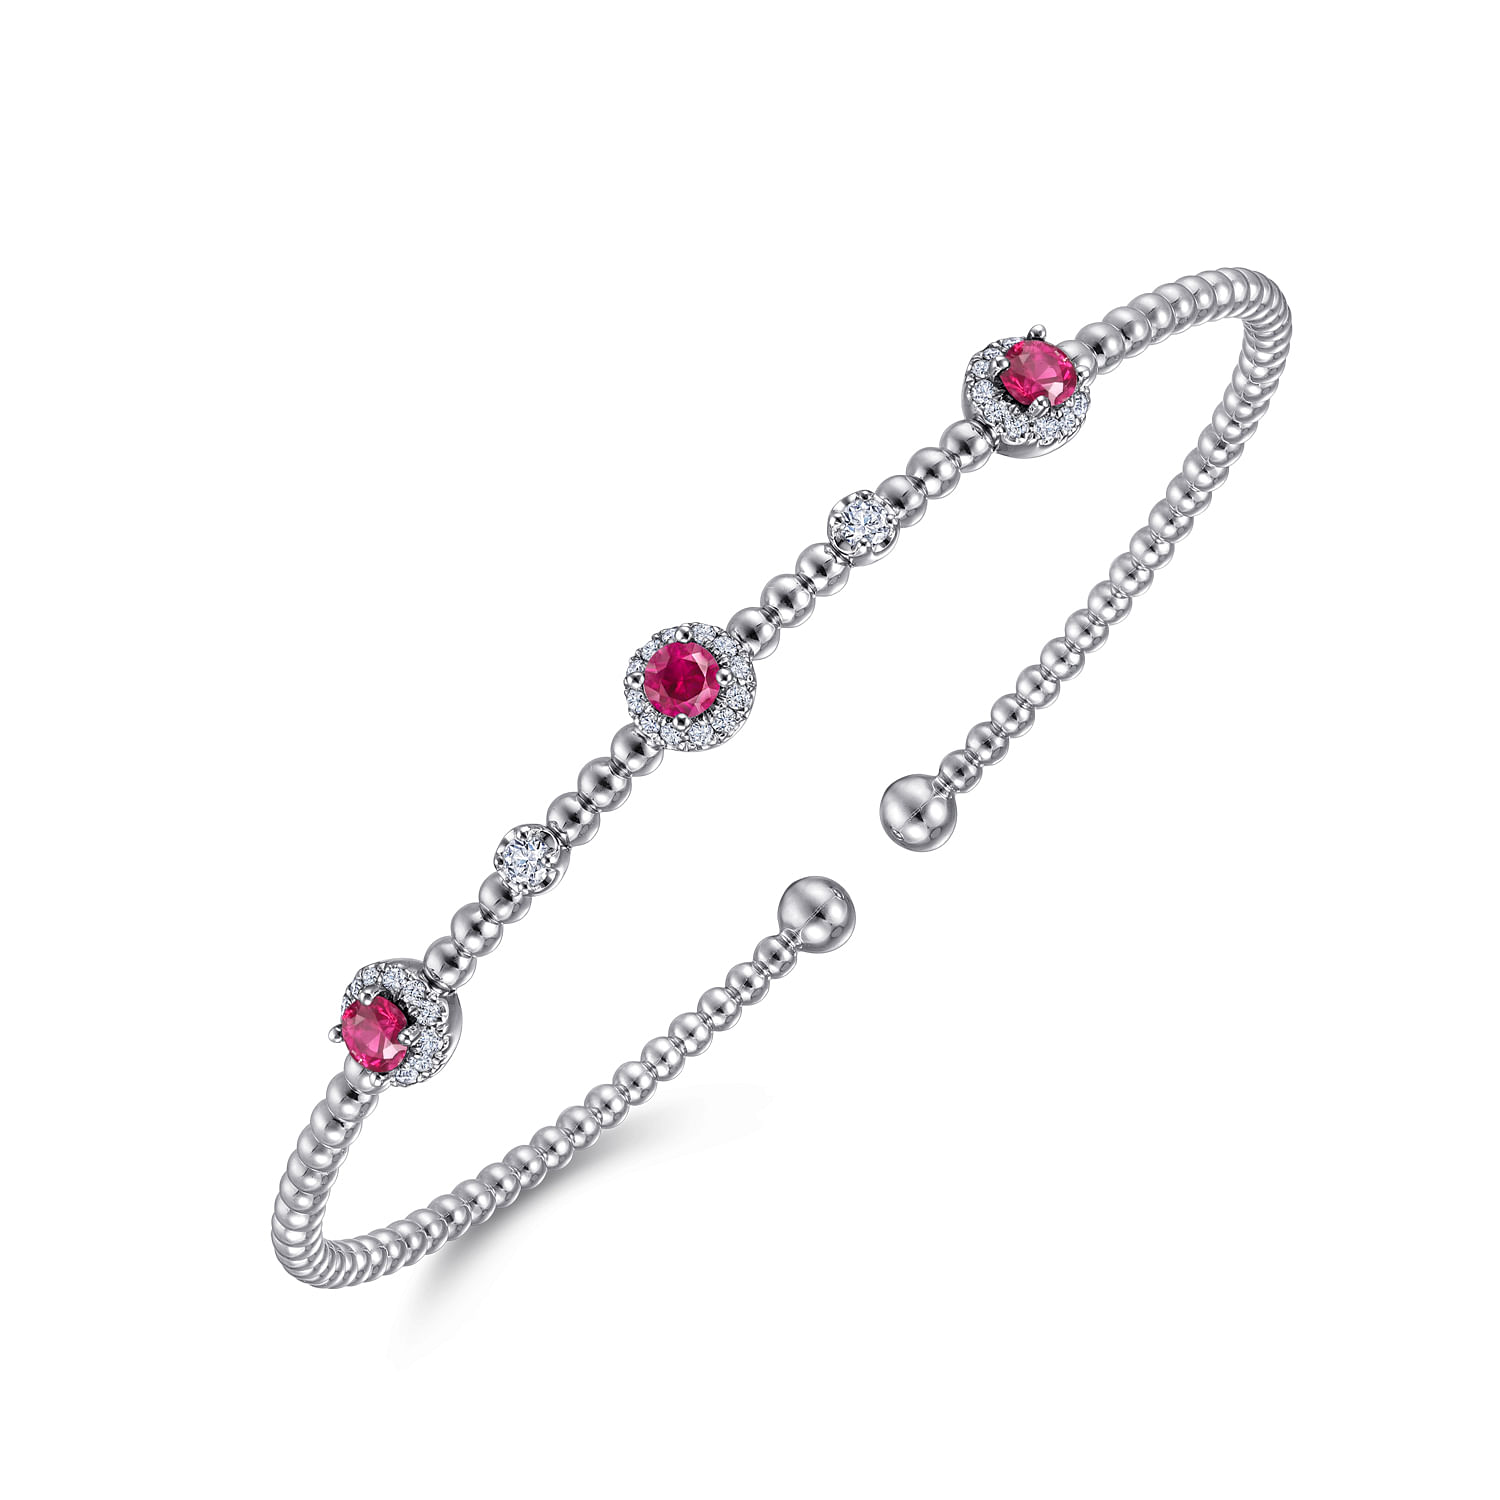 14K White Gold Bujukan Bead Cuff Bracelet with Ruby and Diamond Halo Stations